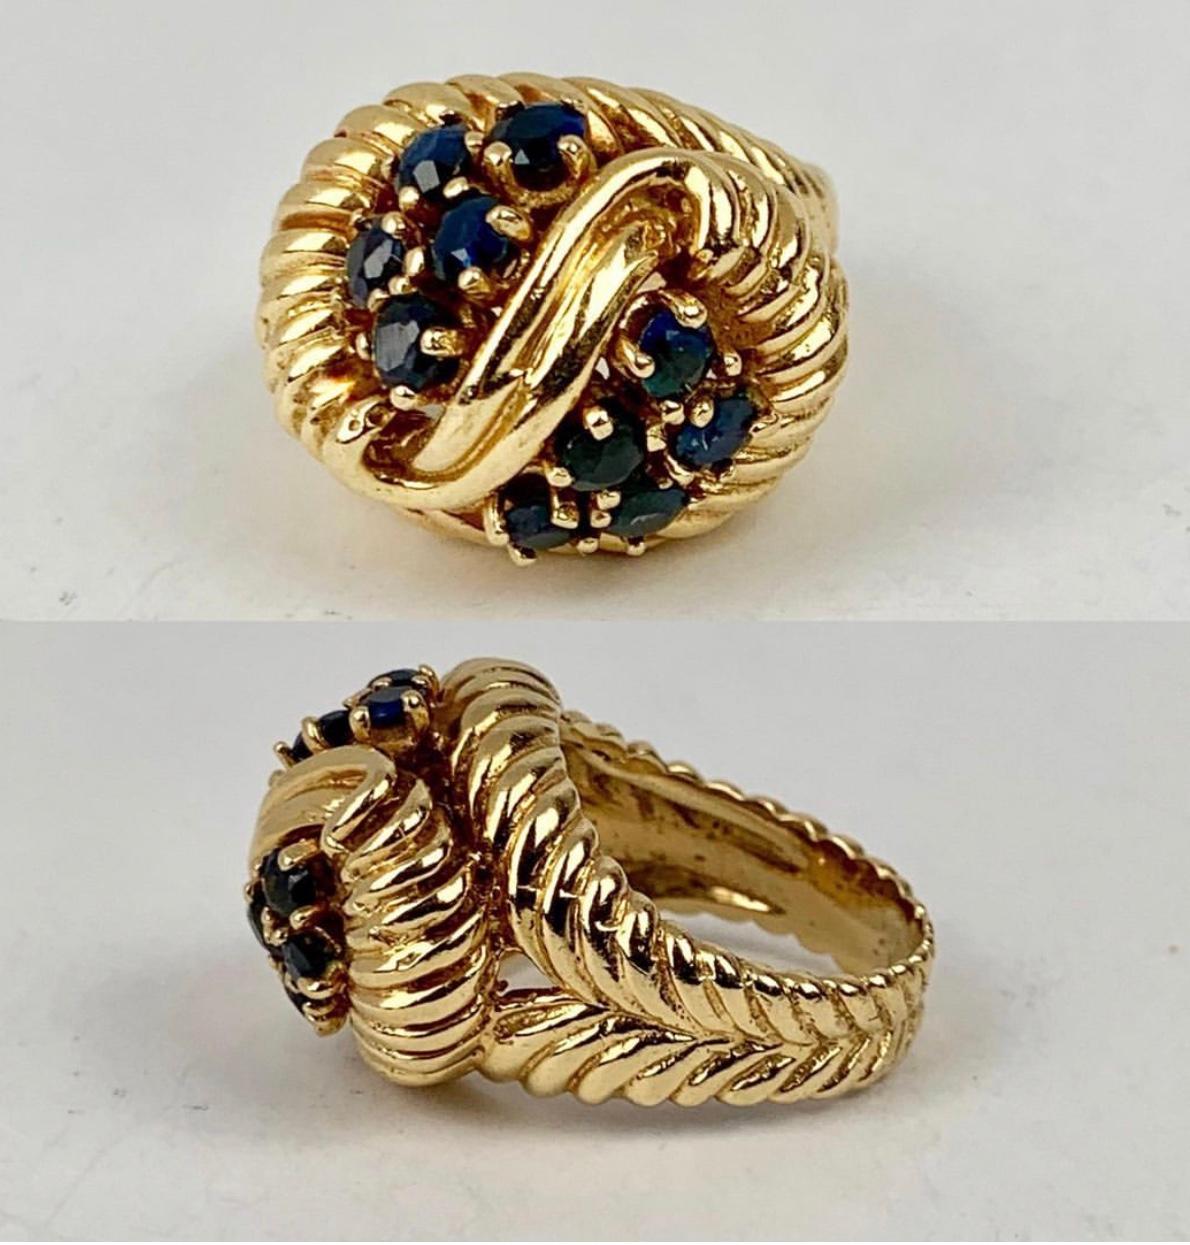 Shrimp style 14k yellow gold ring with 10 round faceted sapphires.  From the 1960's in all original and fine condition.
What is known as 